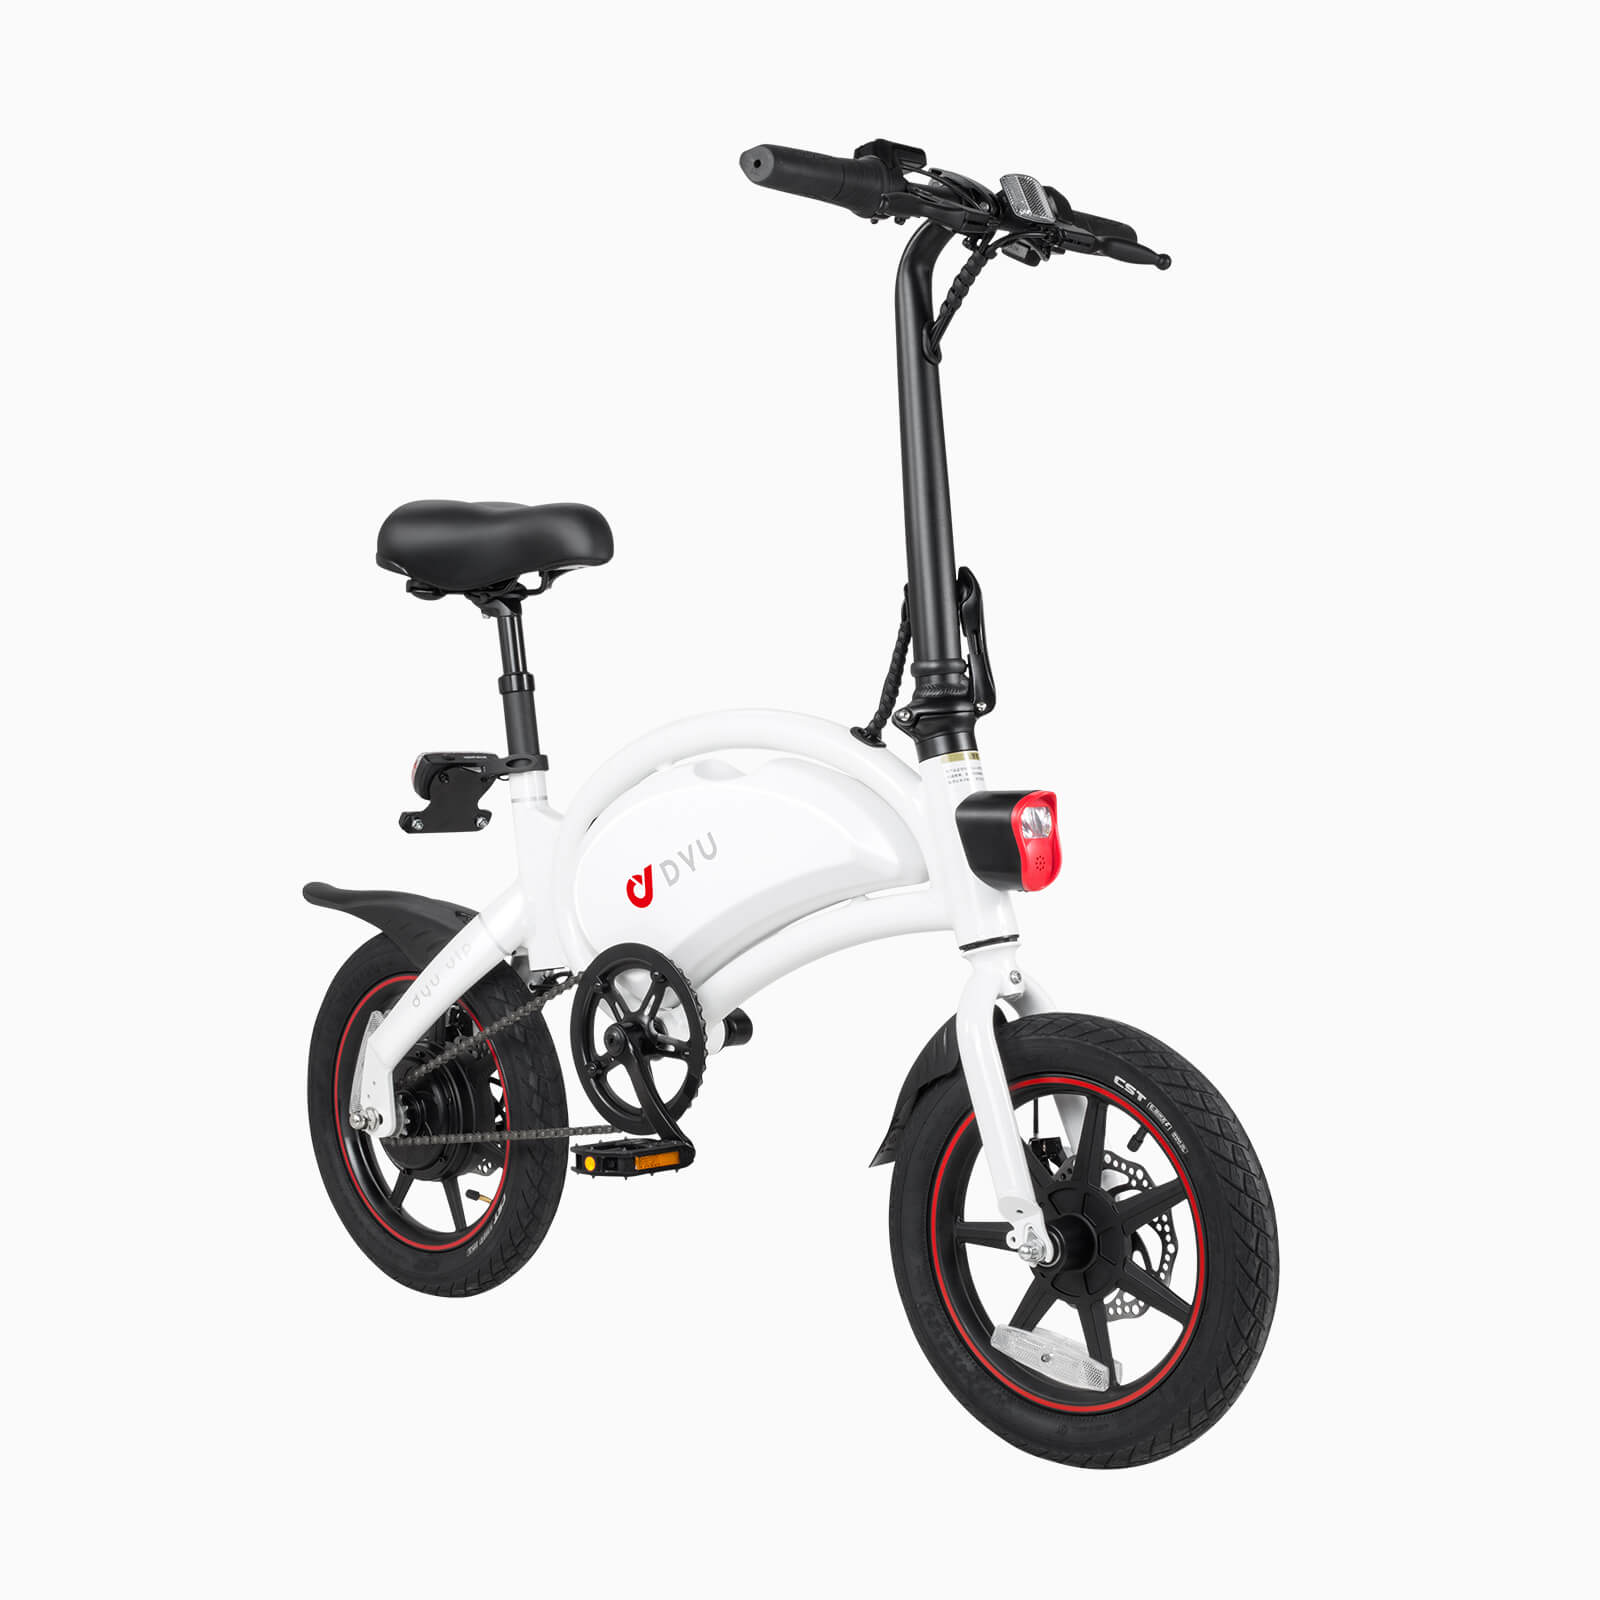 A Smart electric bicycle